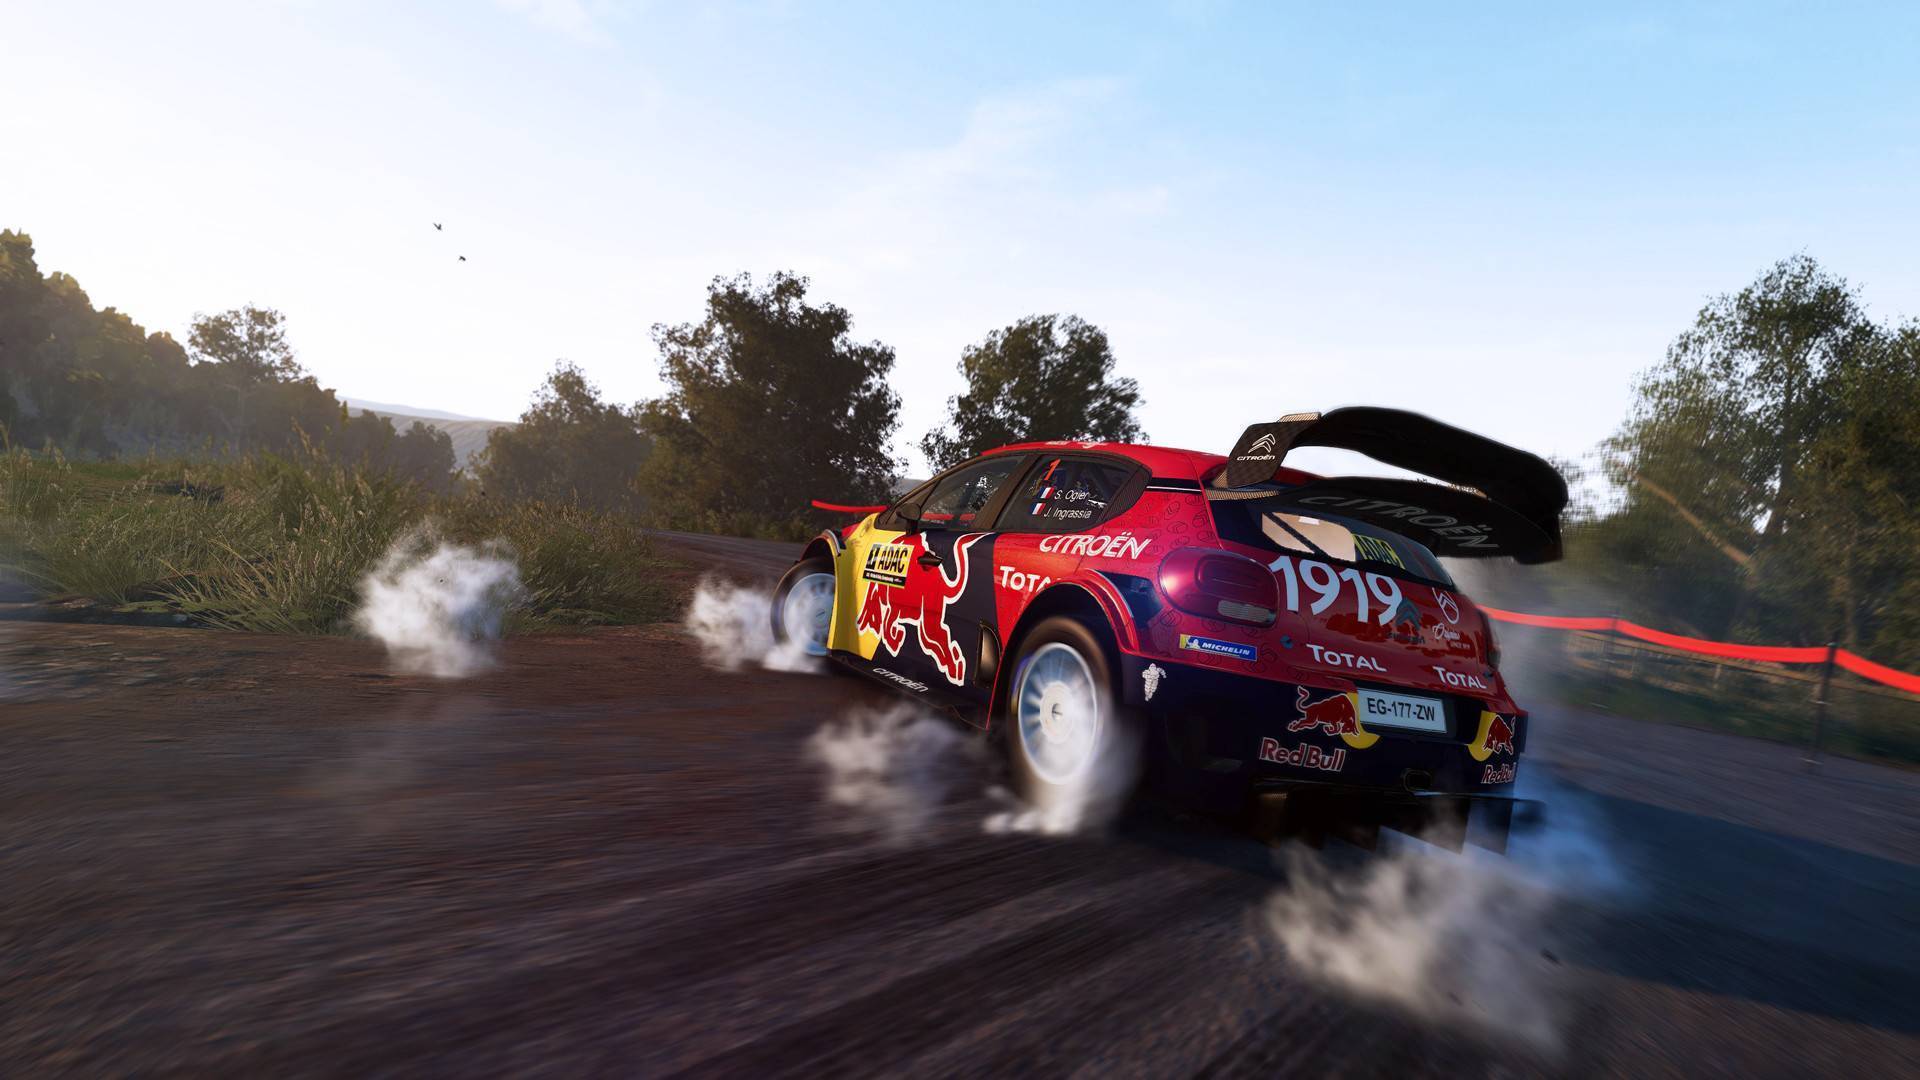 download wrc 6 game for free